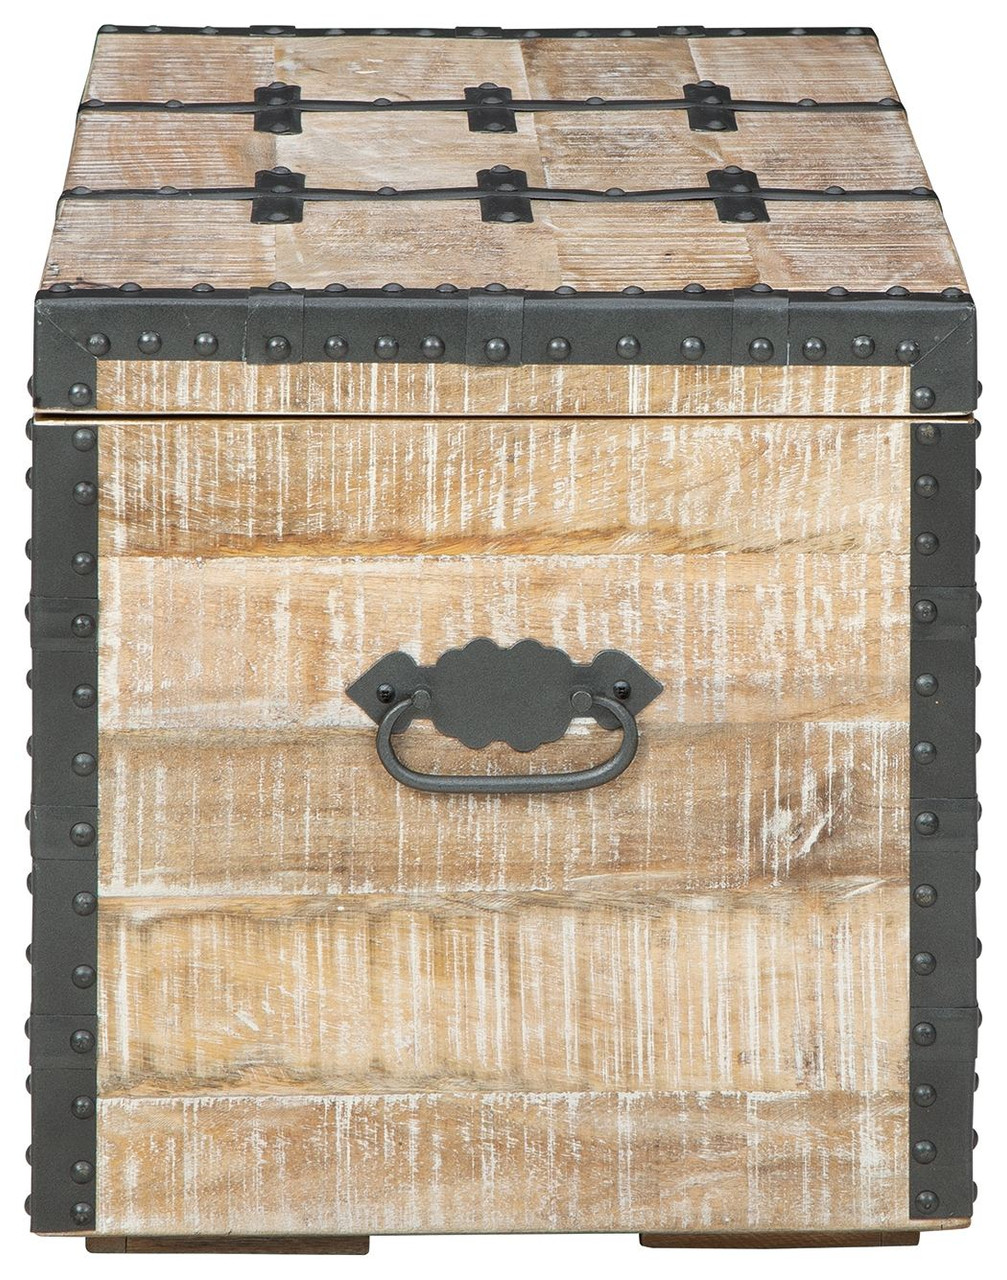 The Kettleby Brown Storage Trunk is available at Complete Suite Furniture,  serving the Pacific Northwest.